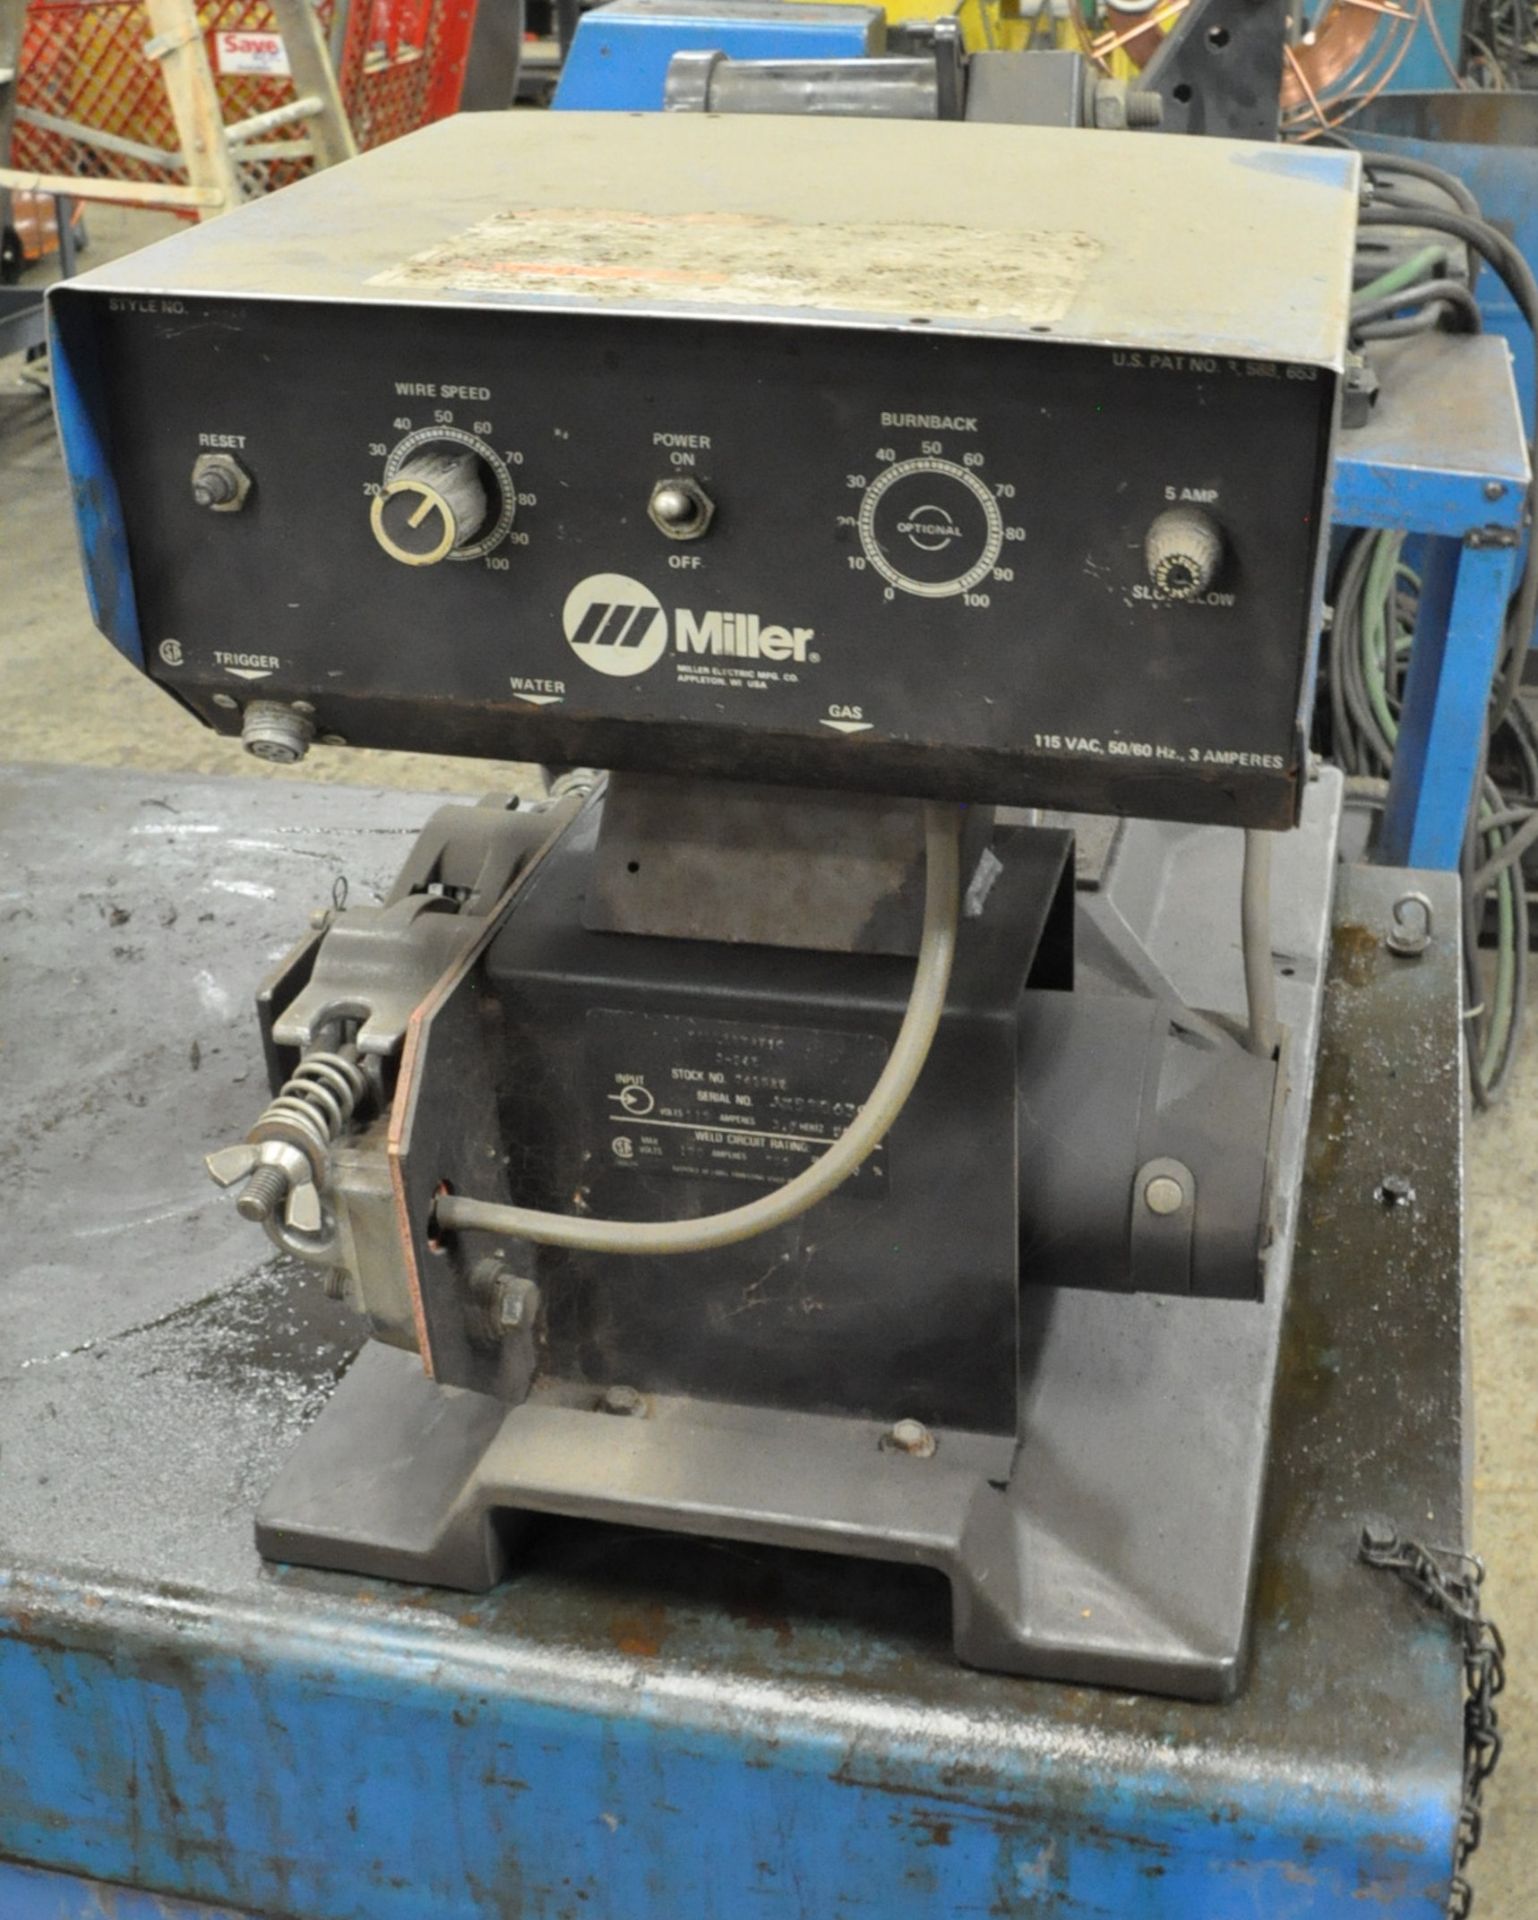 Miller Deltaweld 450, 450-Amp DC Arc Welding Power Source with Millermatic S-45E Wire Feeder - Image 2 of 3